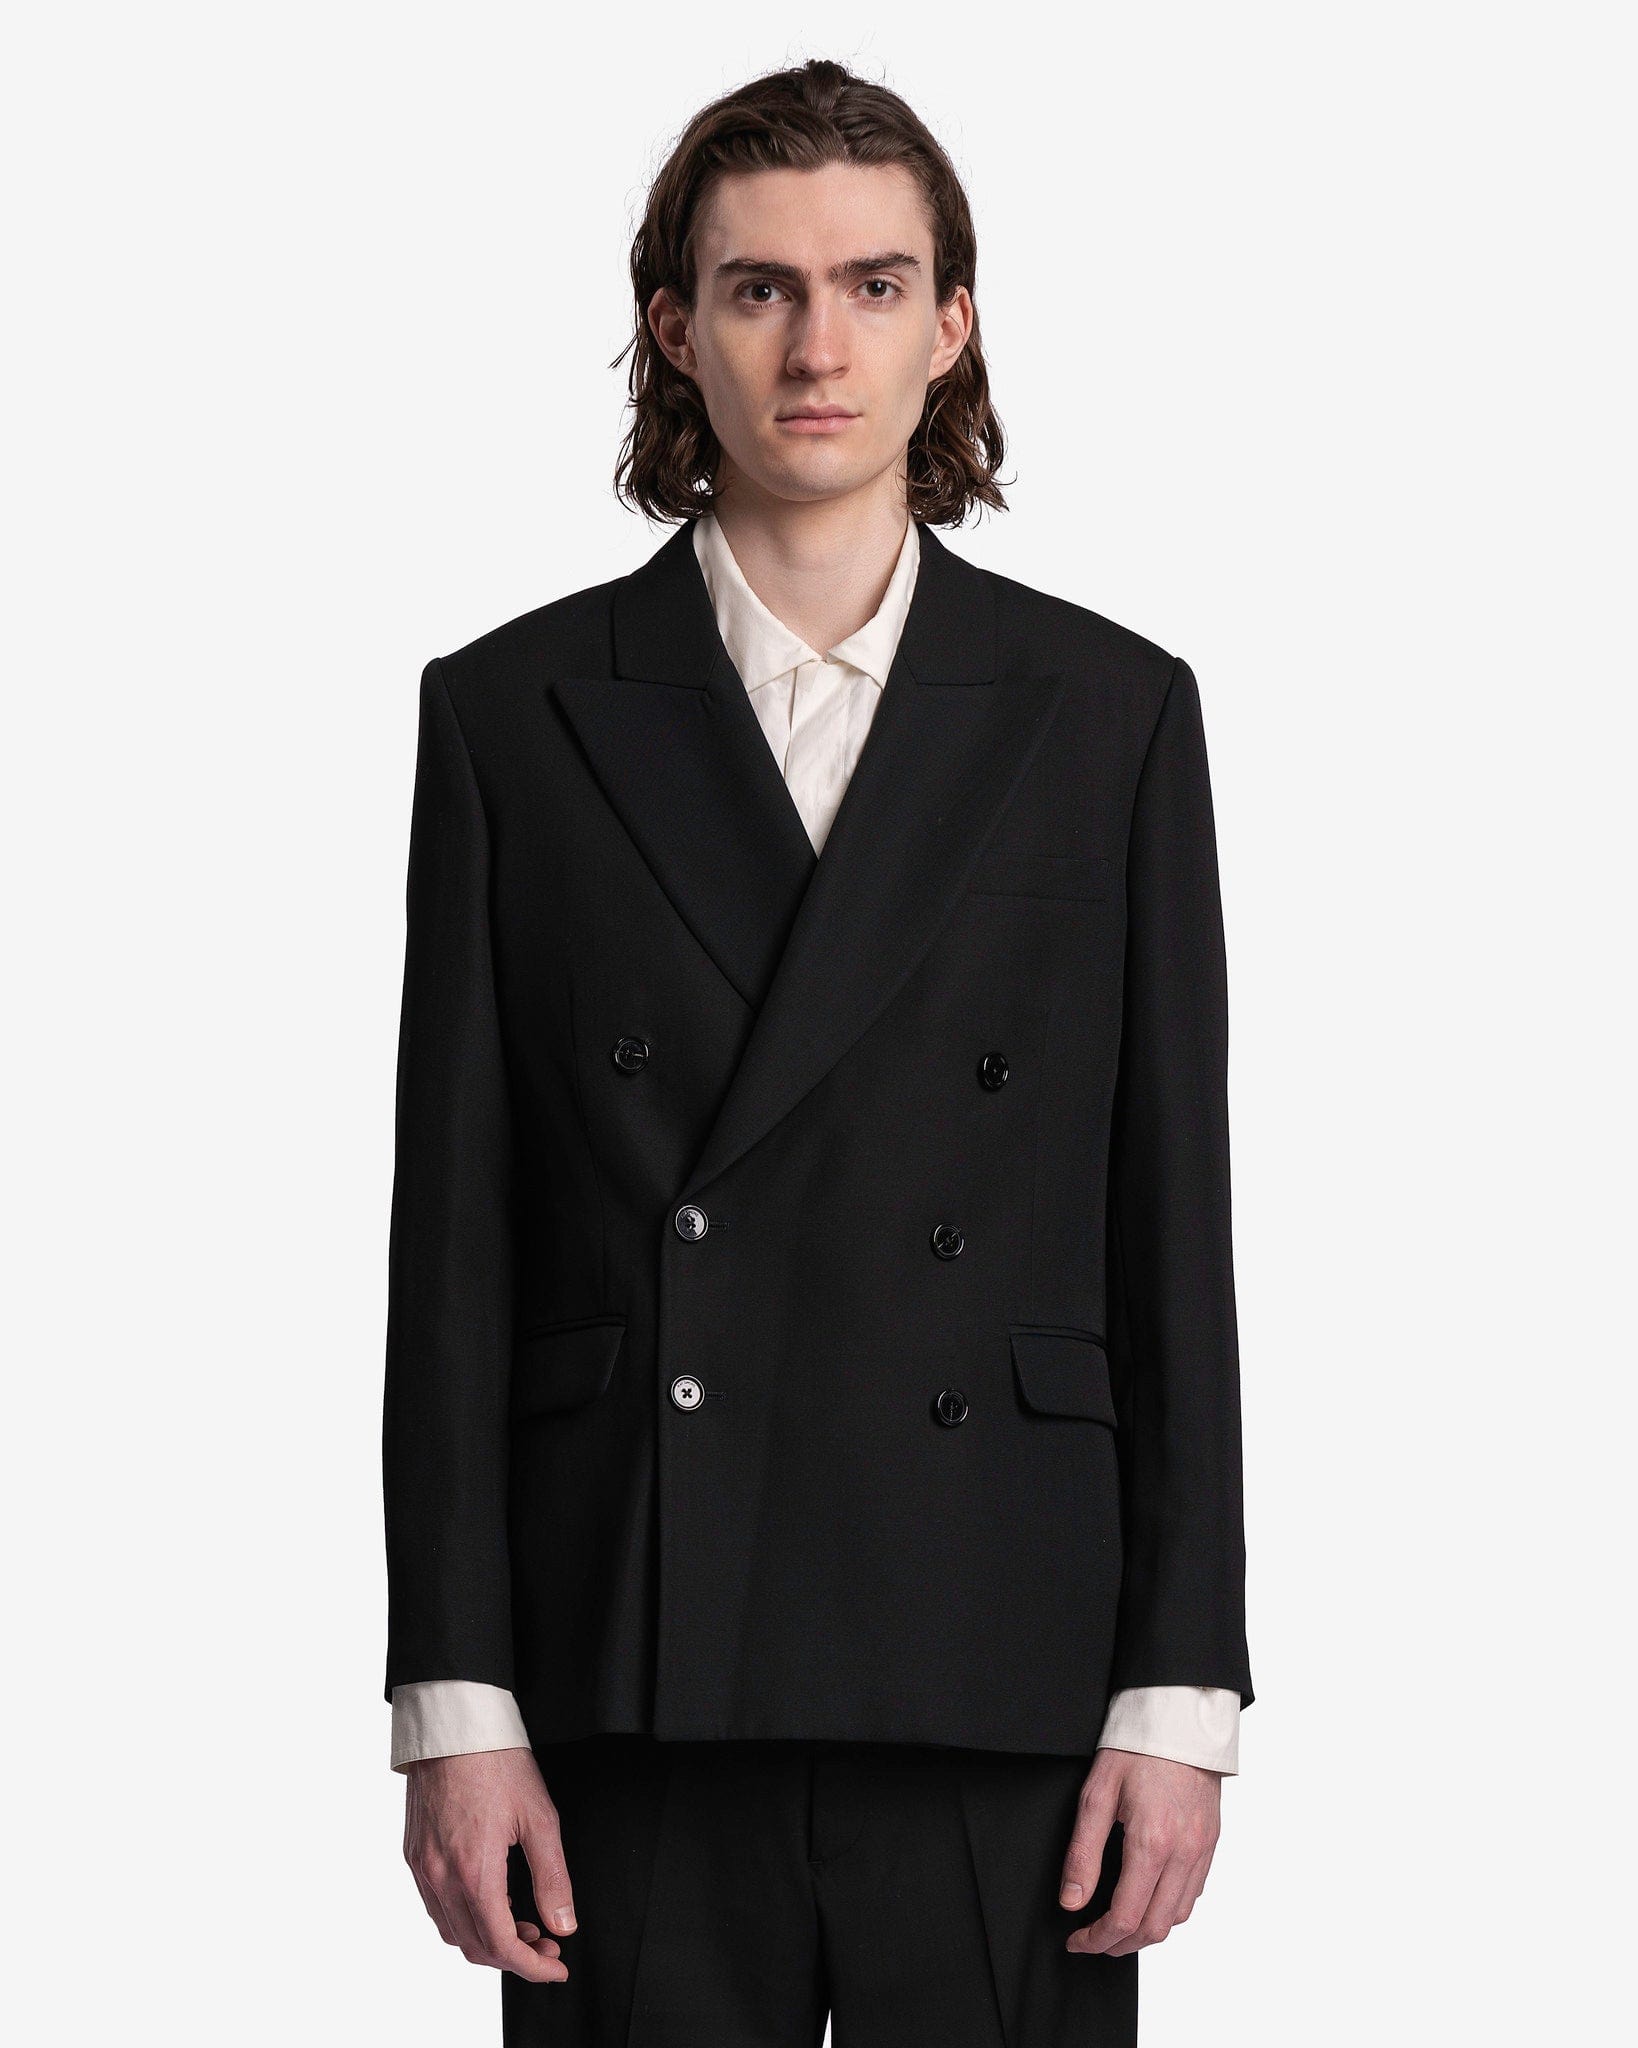 Raf Simons Men's Jackets Double Breasted Blazer with Peacock Lapel in Black